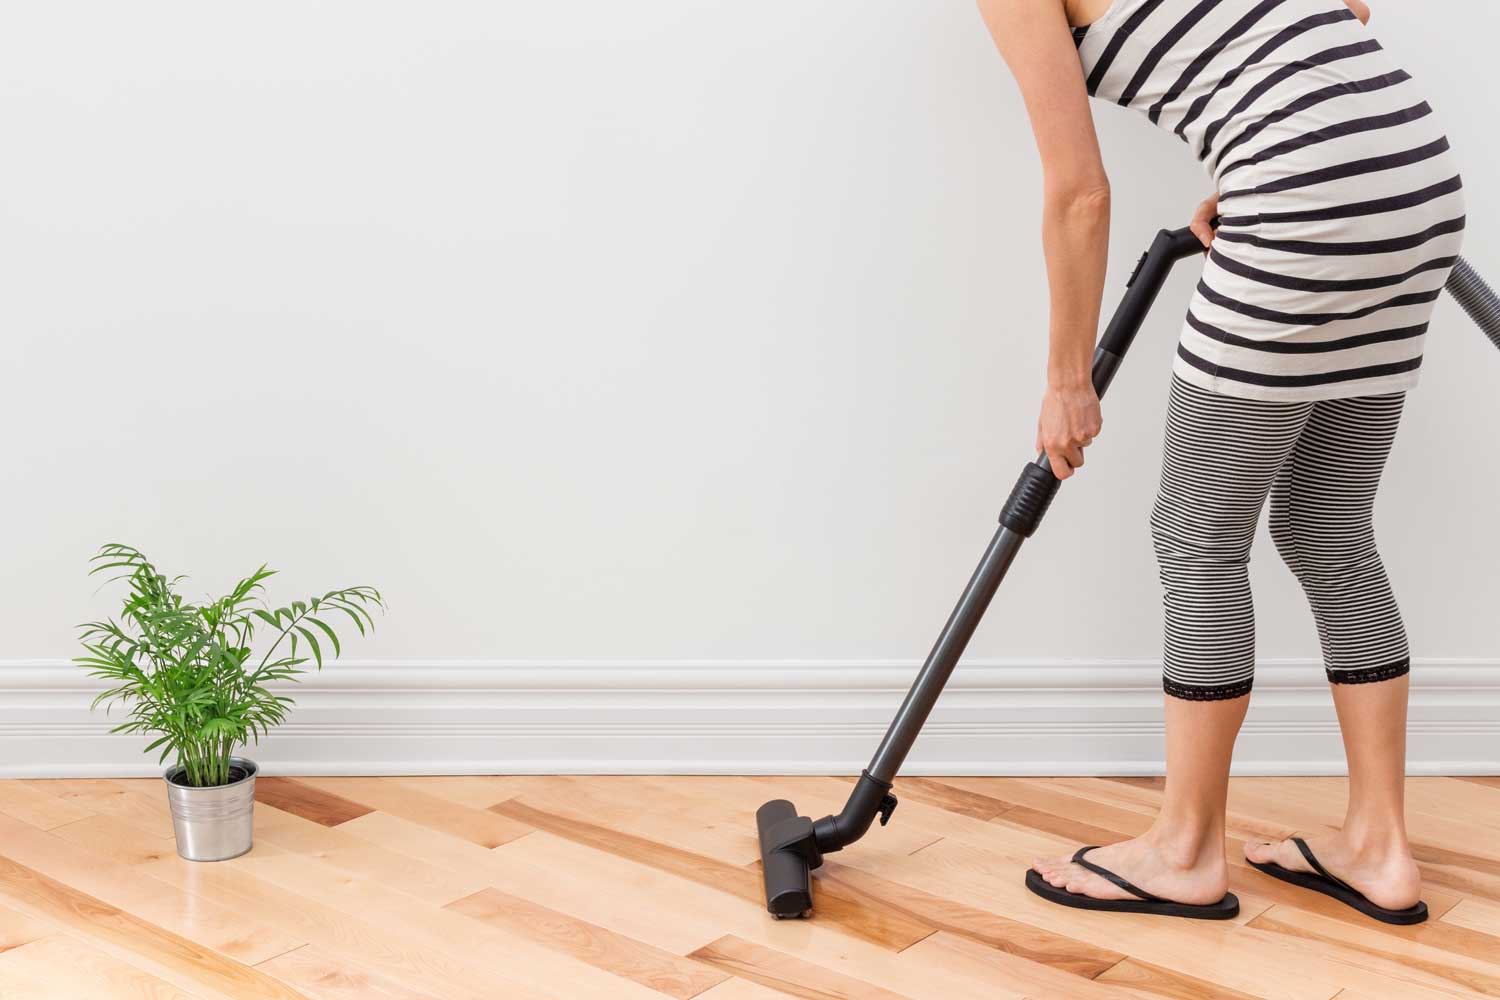 Regulary vacuum or sweep floors to remove dirt and keep your home floors looking amazing - tips from Footprints Floors in Garland / Rockwall.